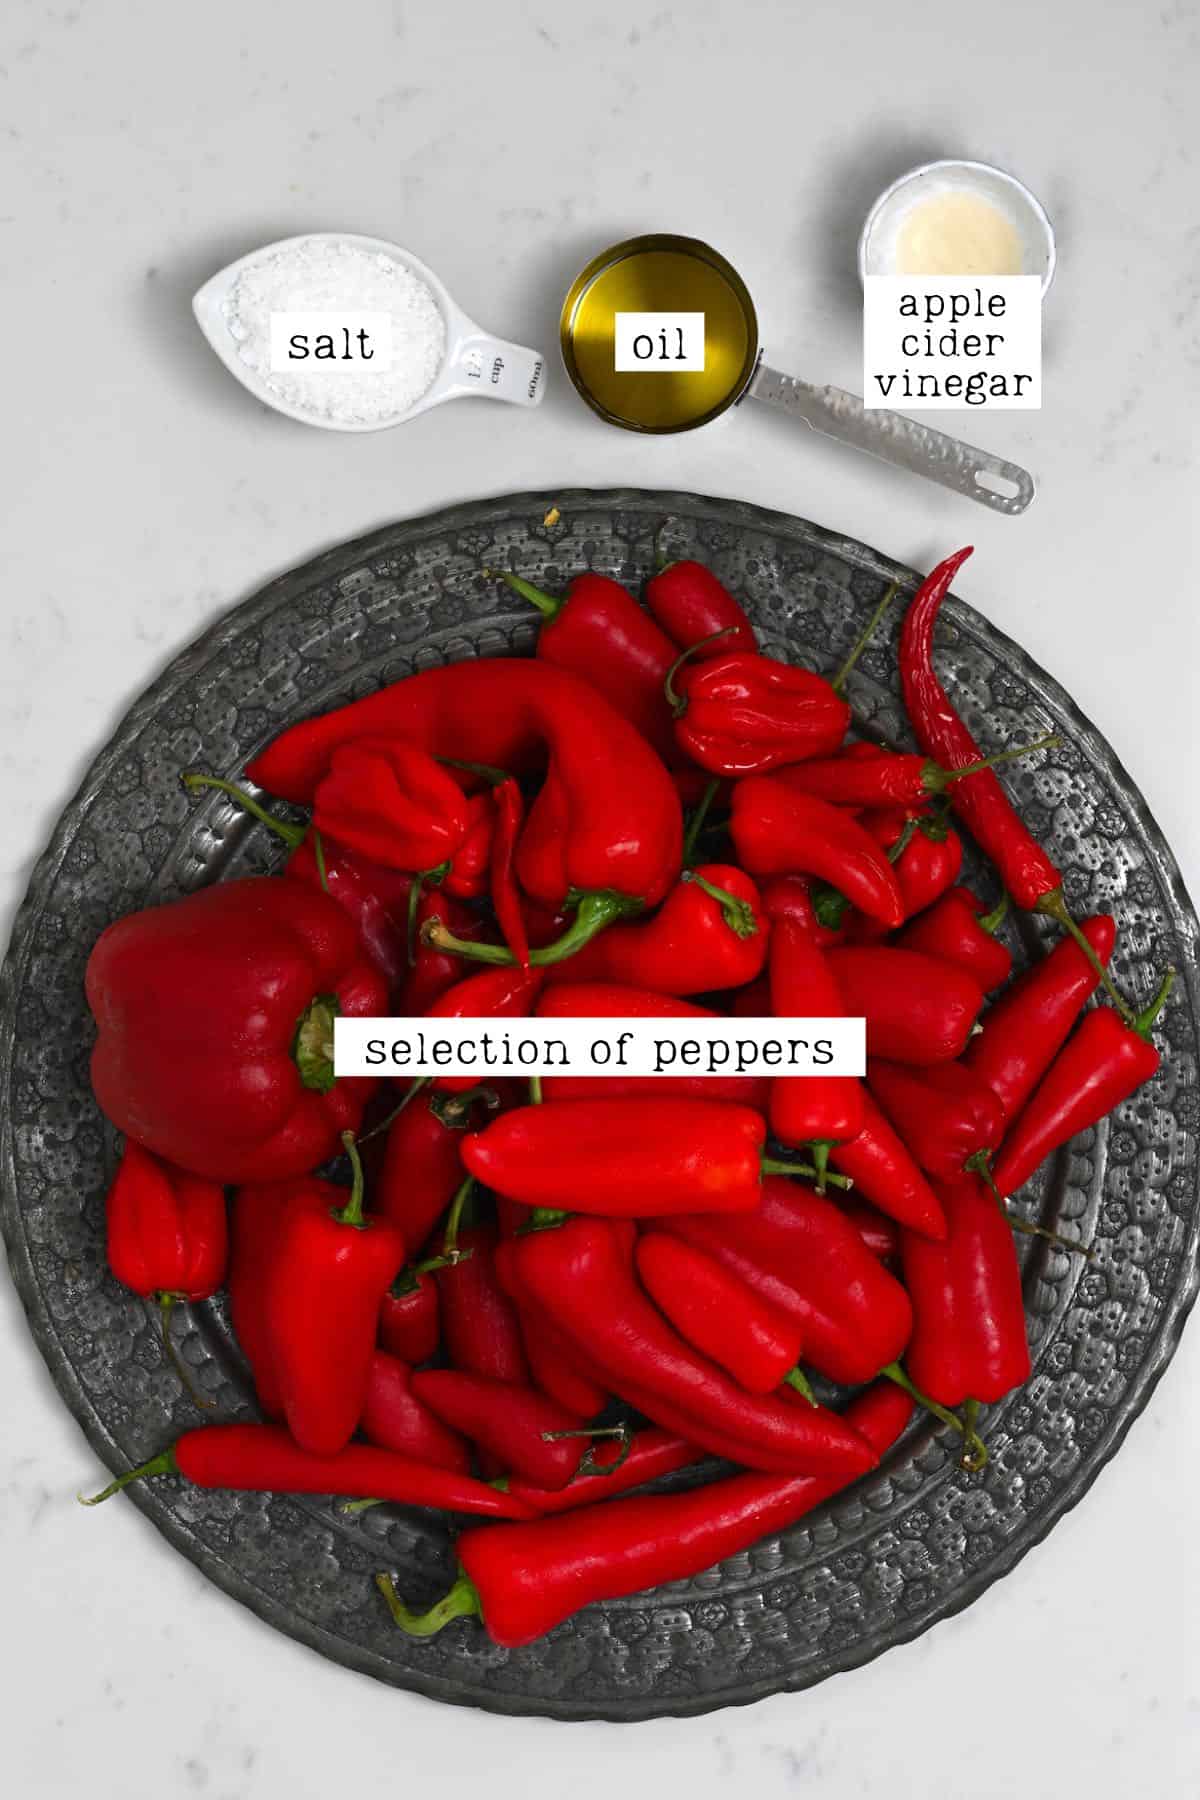 Ingredients for red pepper paste